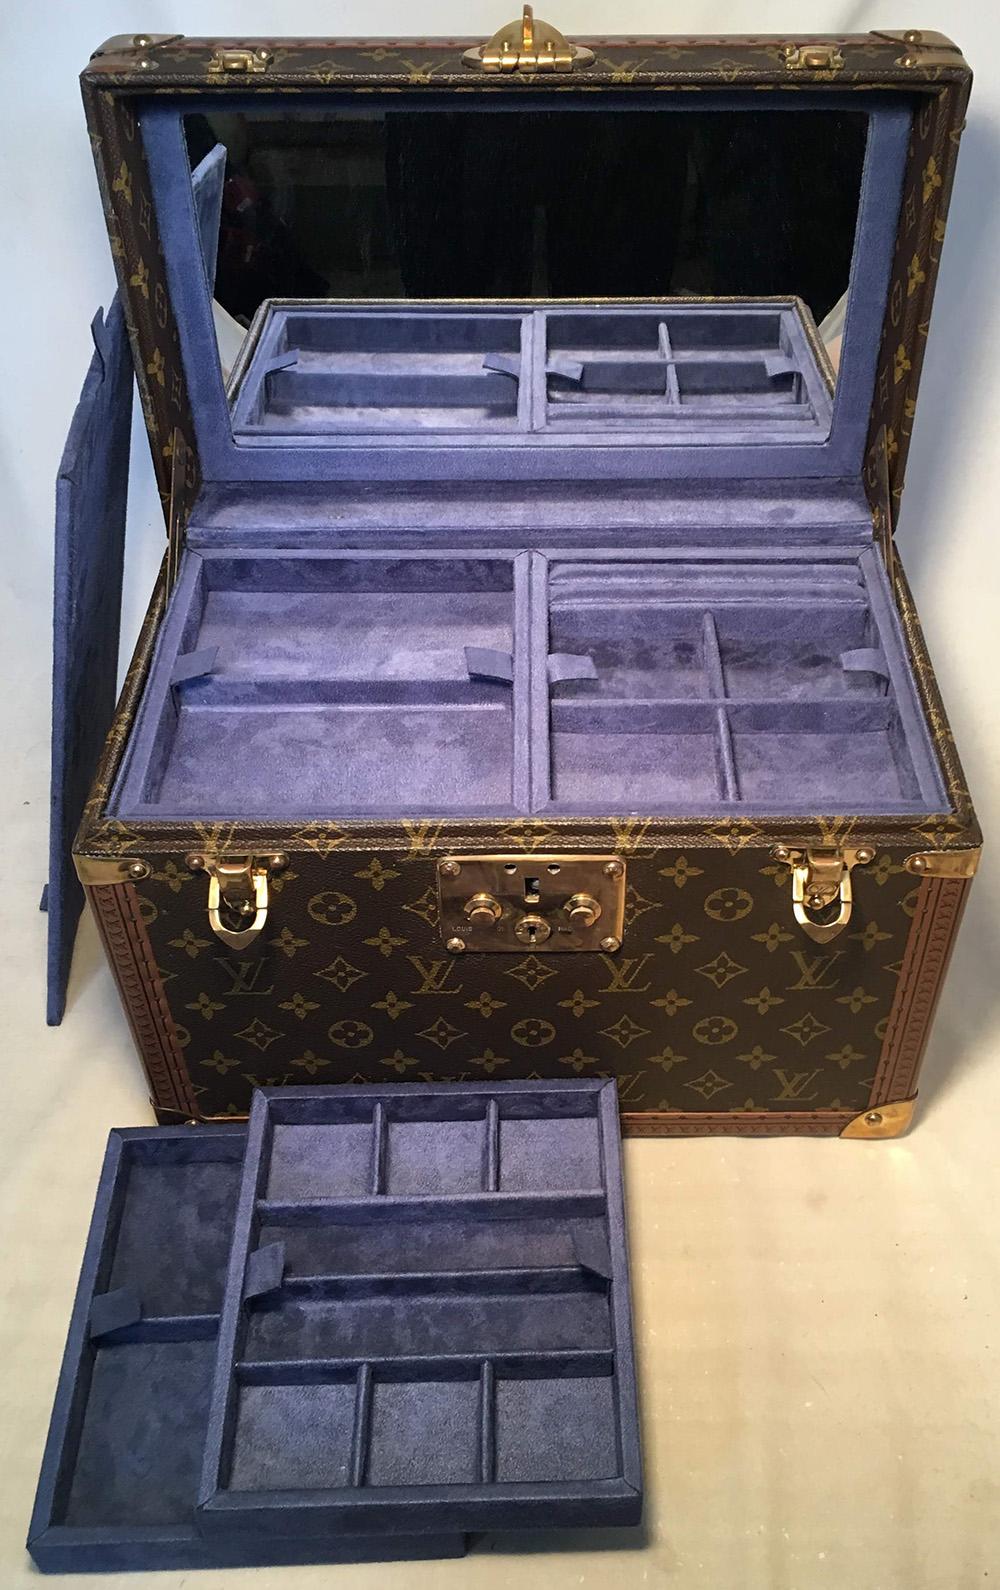 Louis Vuitton Custom Monogram Jewelry Travel Train Case with 16 Ultrasuede Trays 2